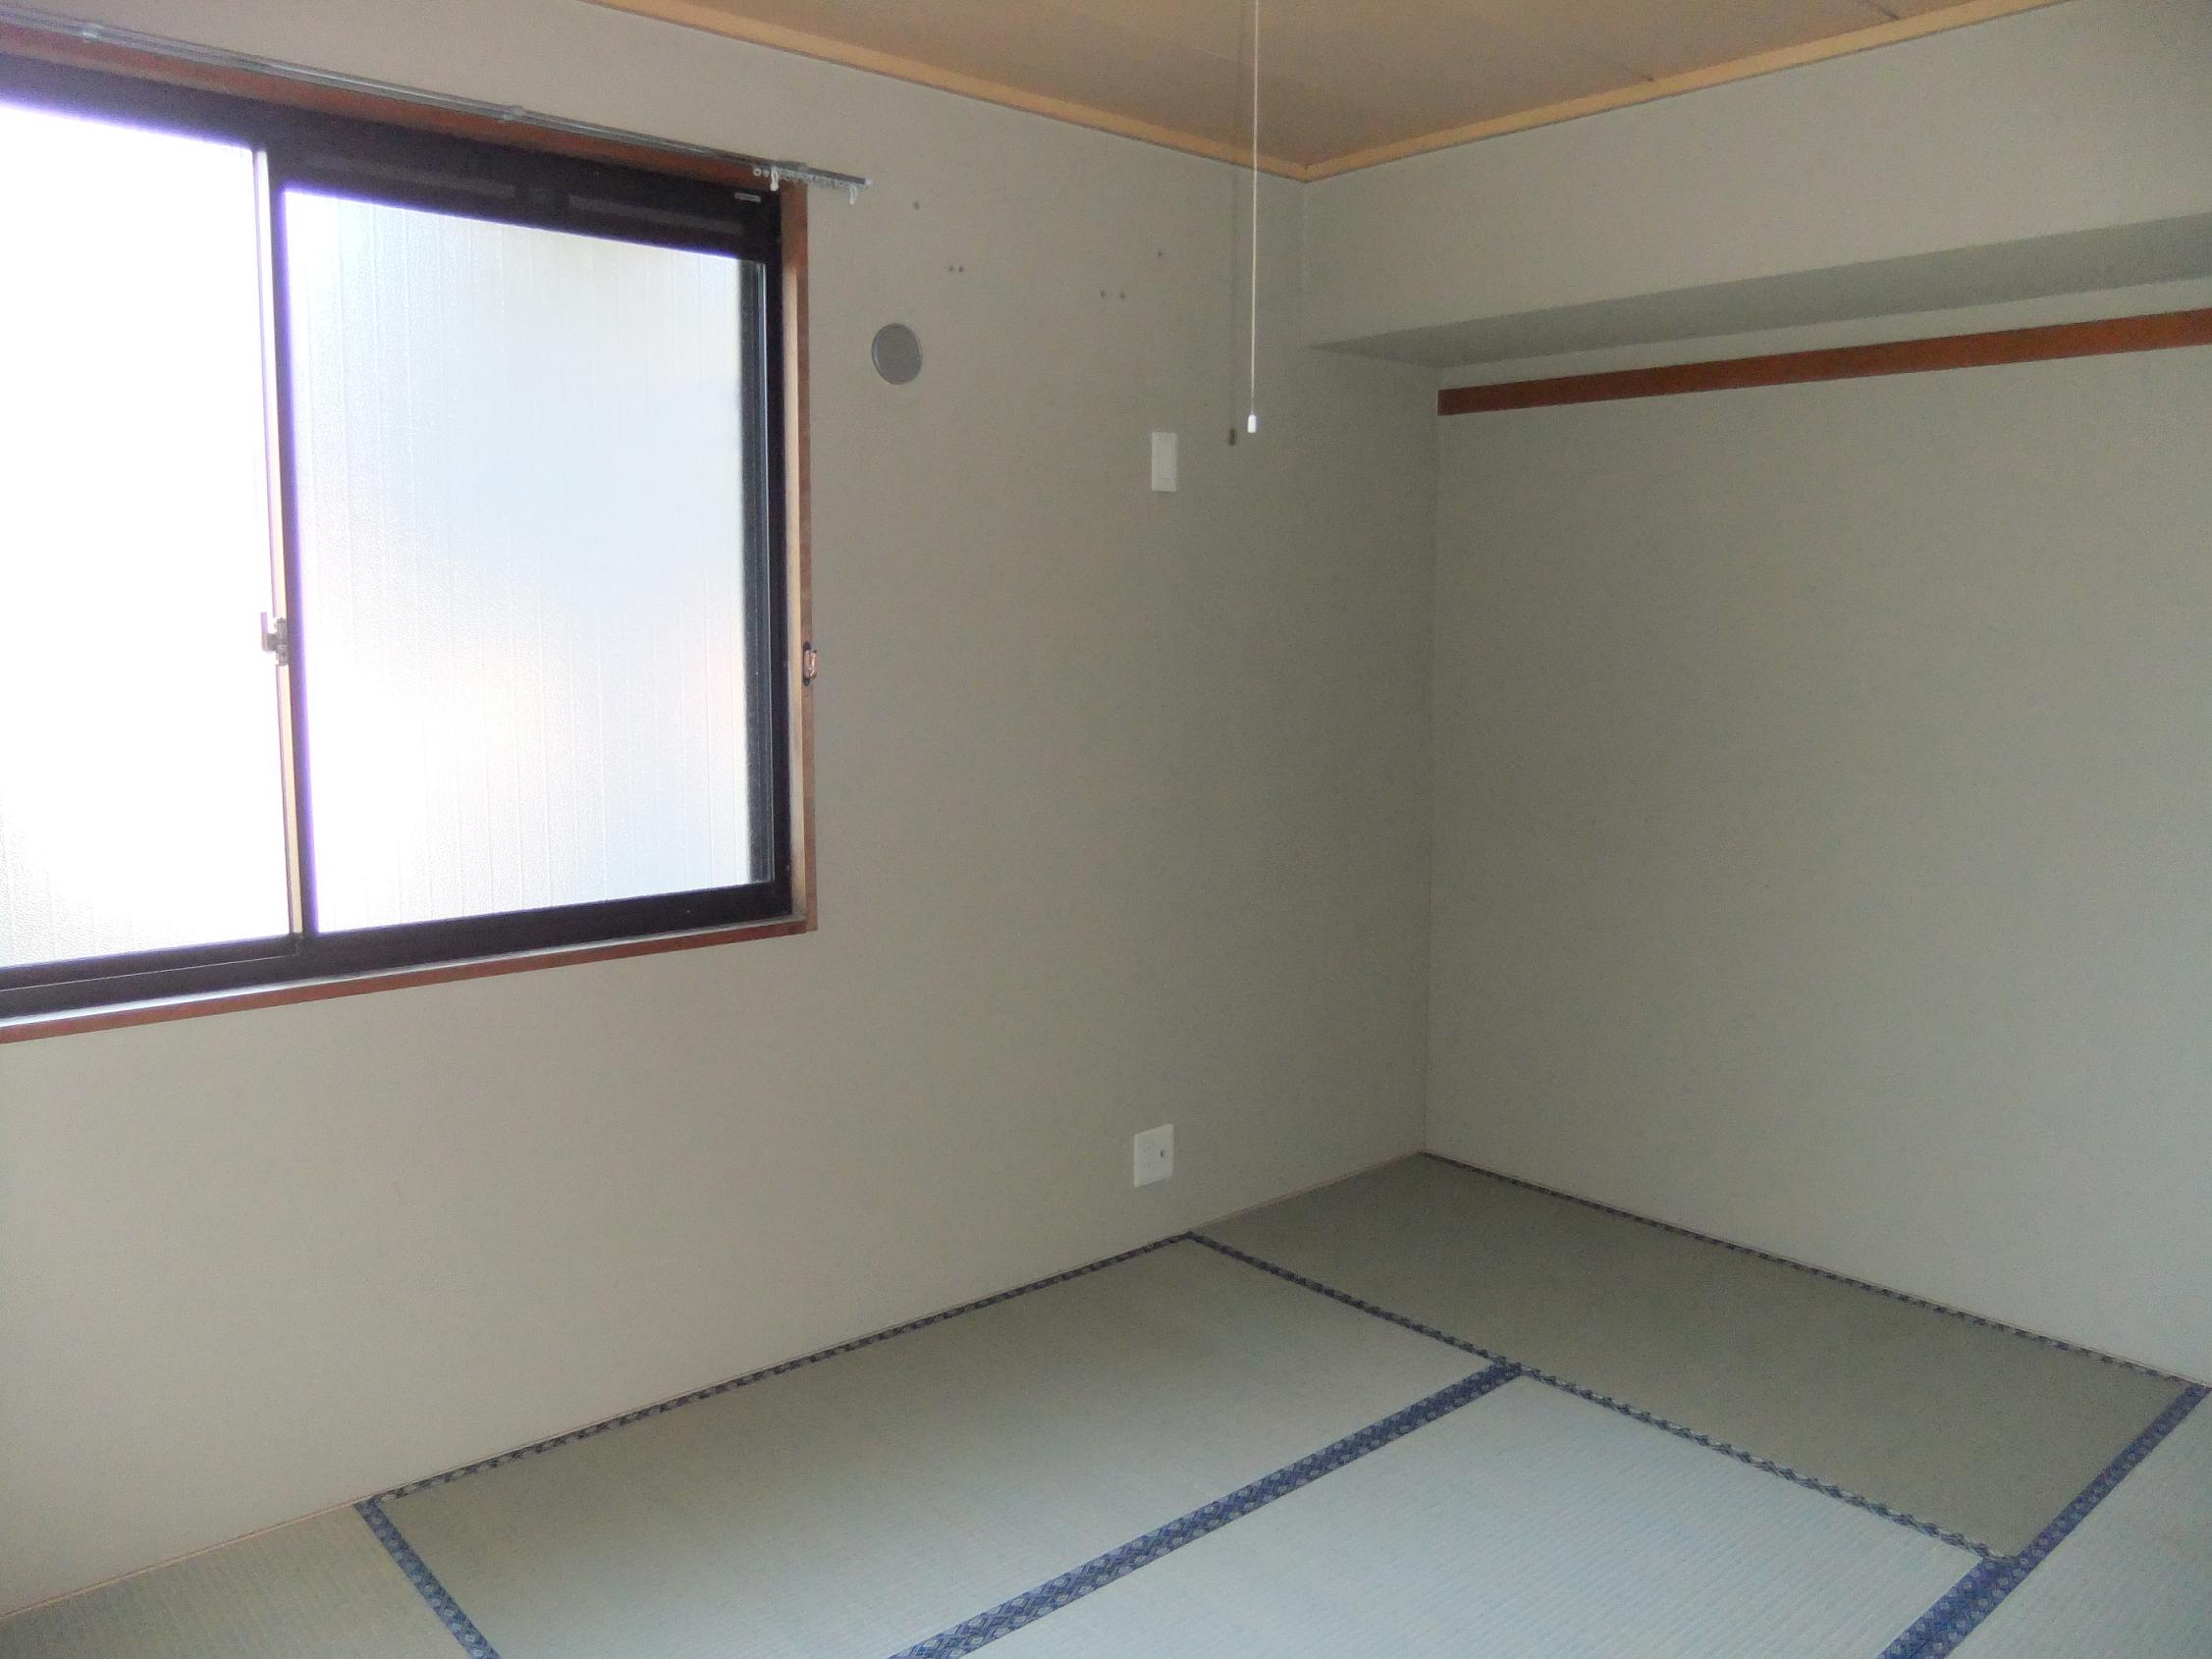 Living and room. North of the Japanese-style room